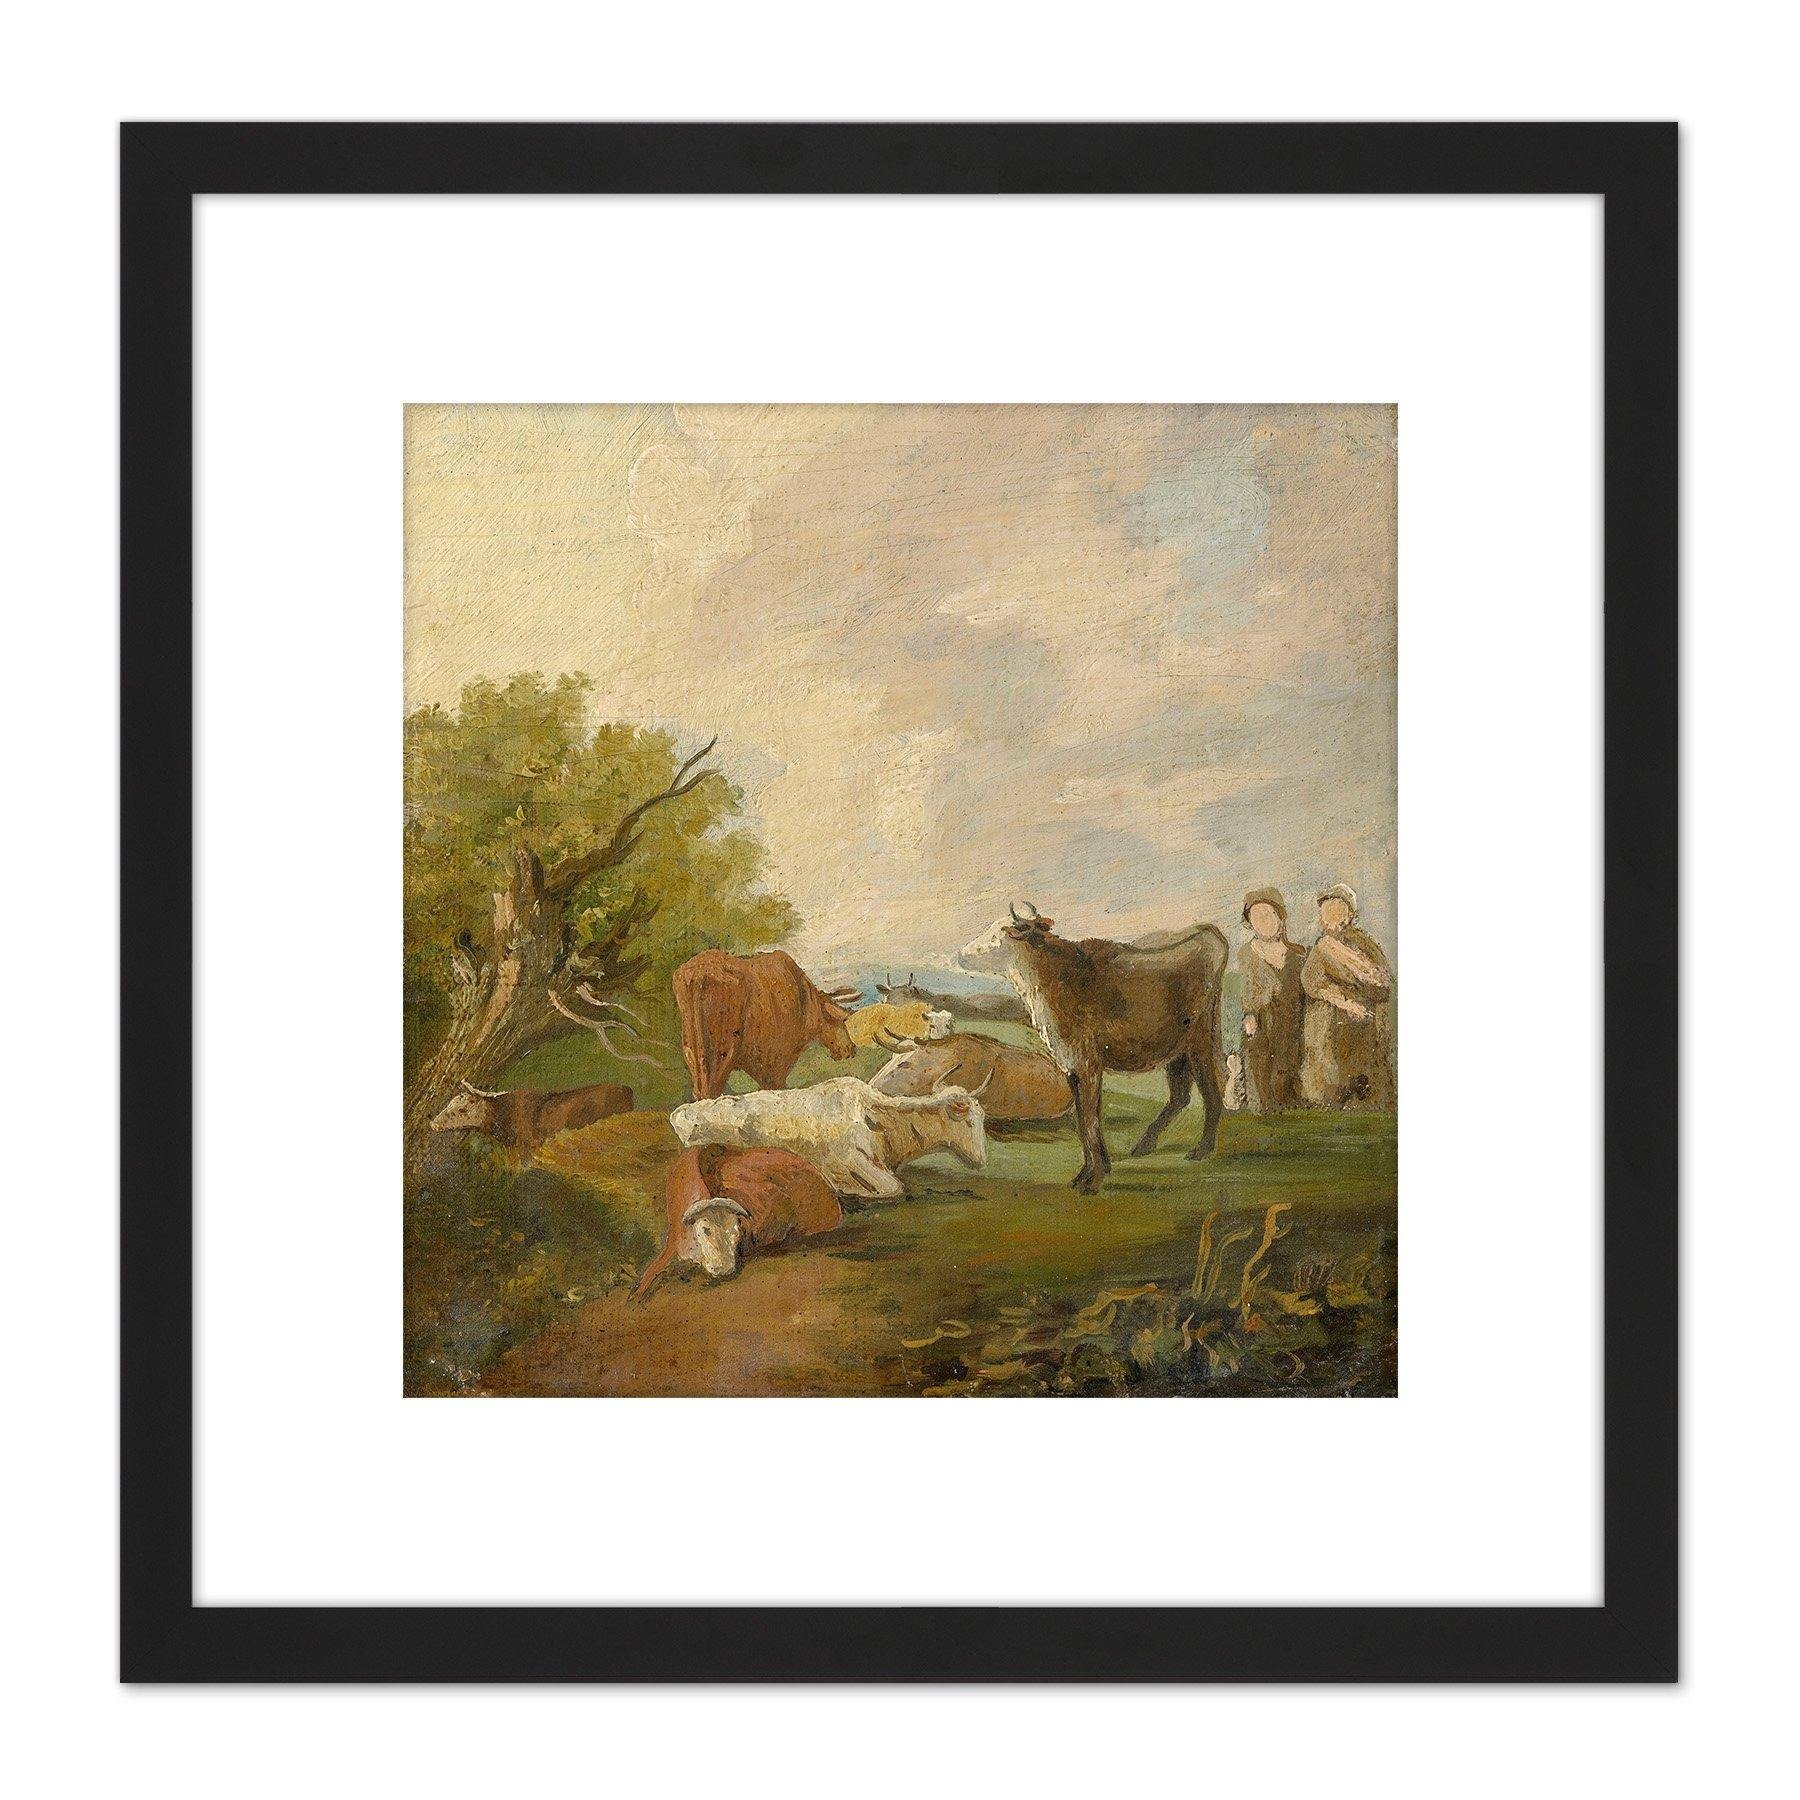 After Gainsborough Figures Ands Cows Field Painting 8X8 Inch Square Wooden Framed Wall Art Print Picture with Mount - image 1